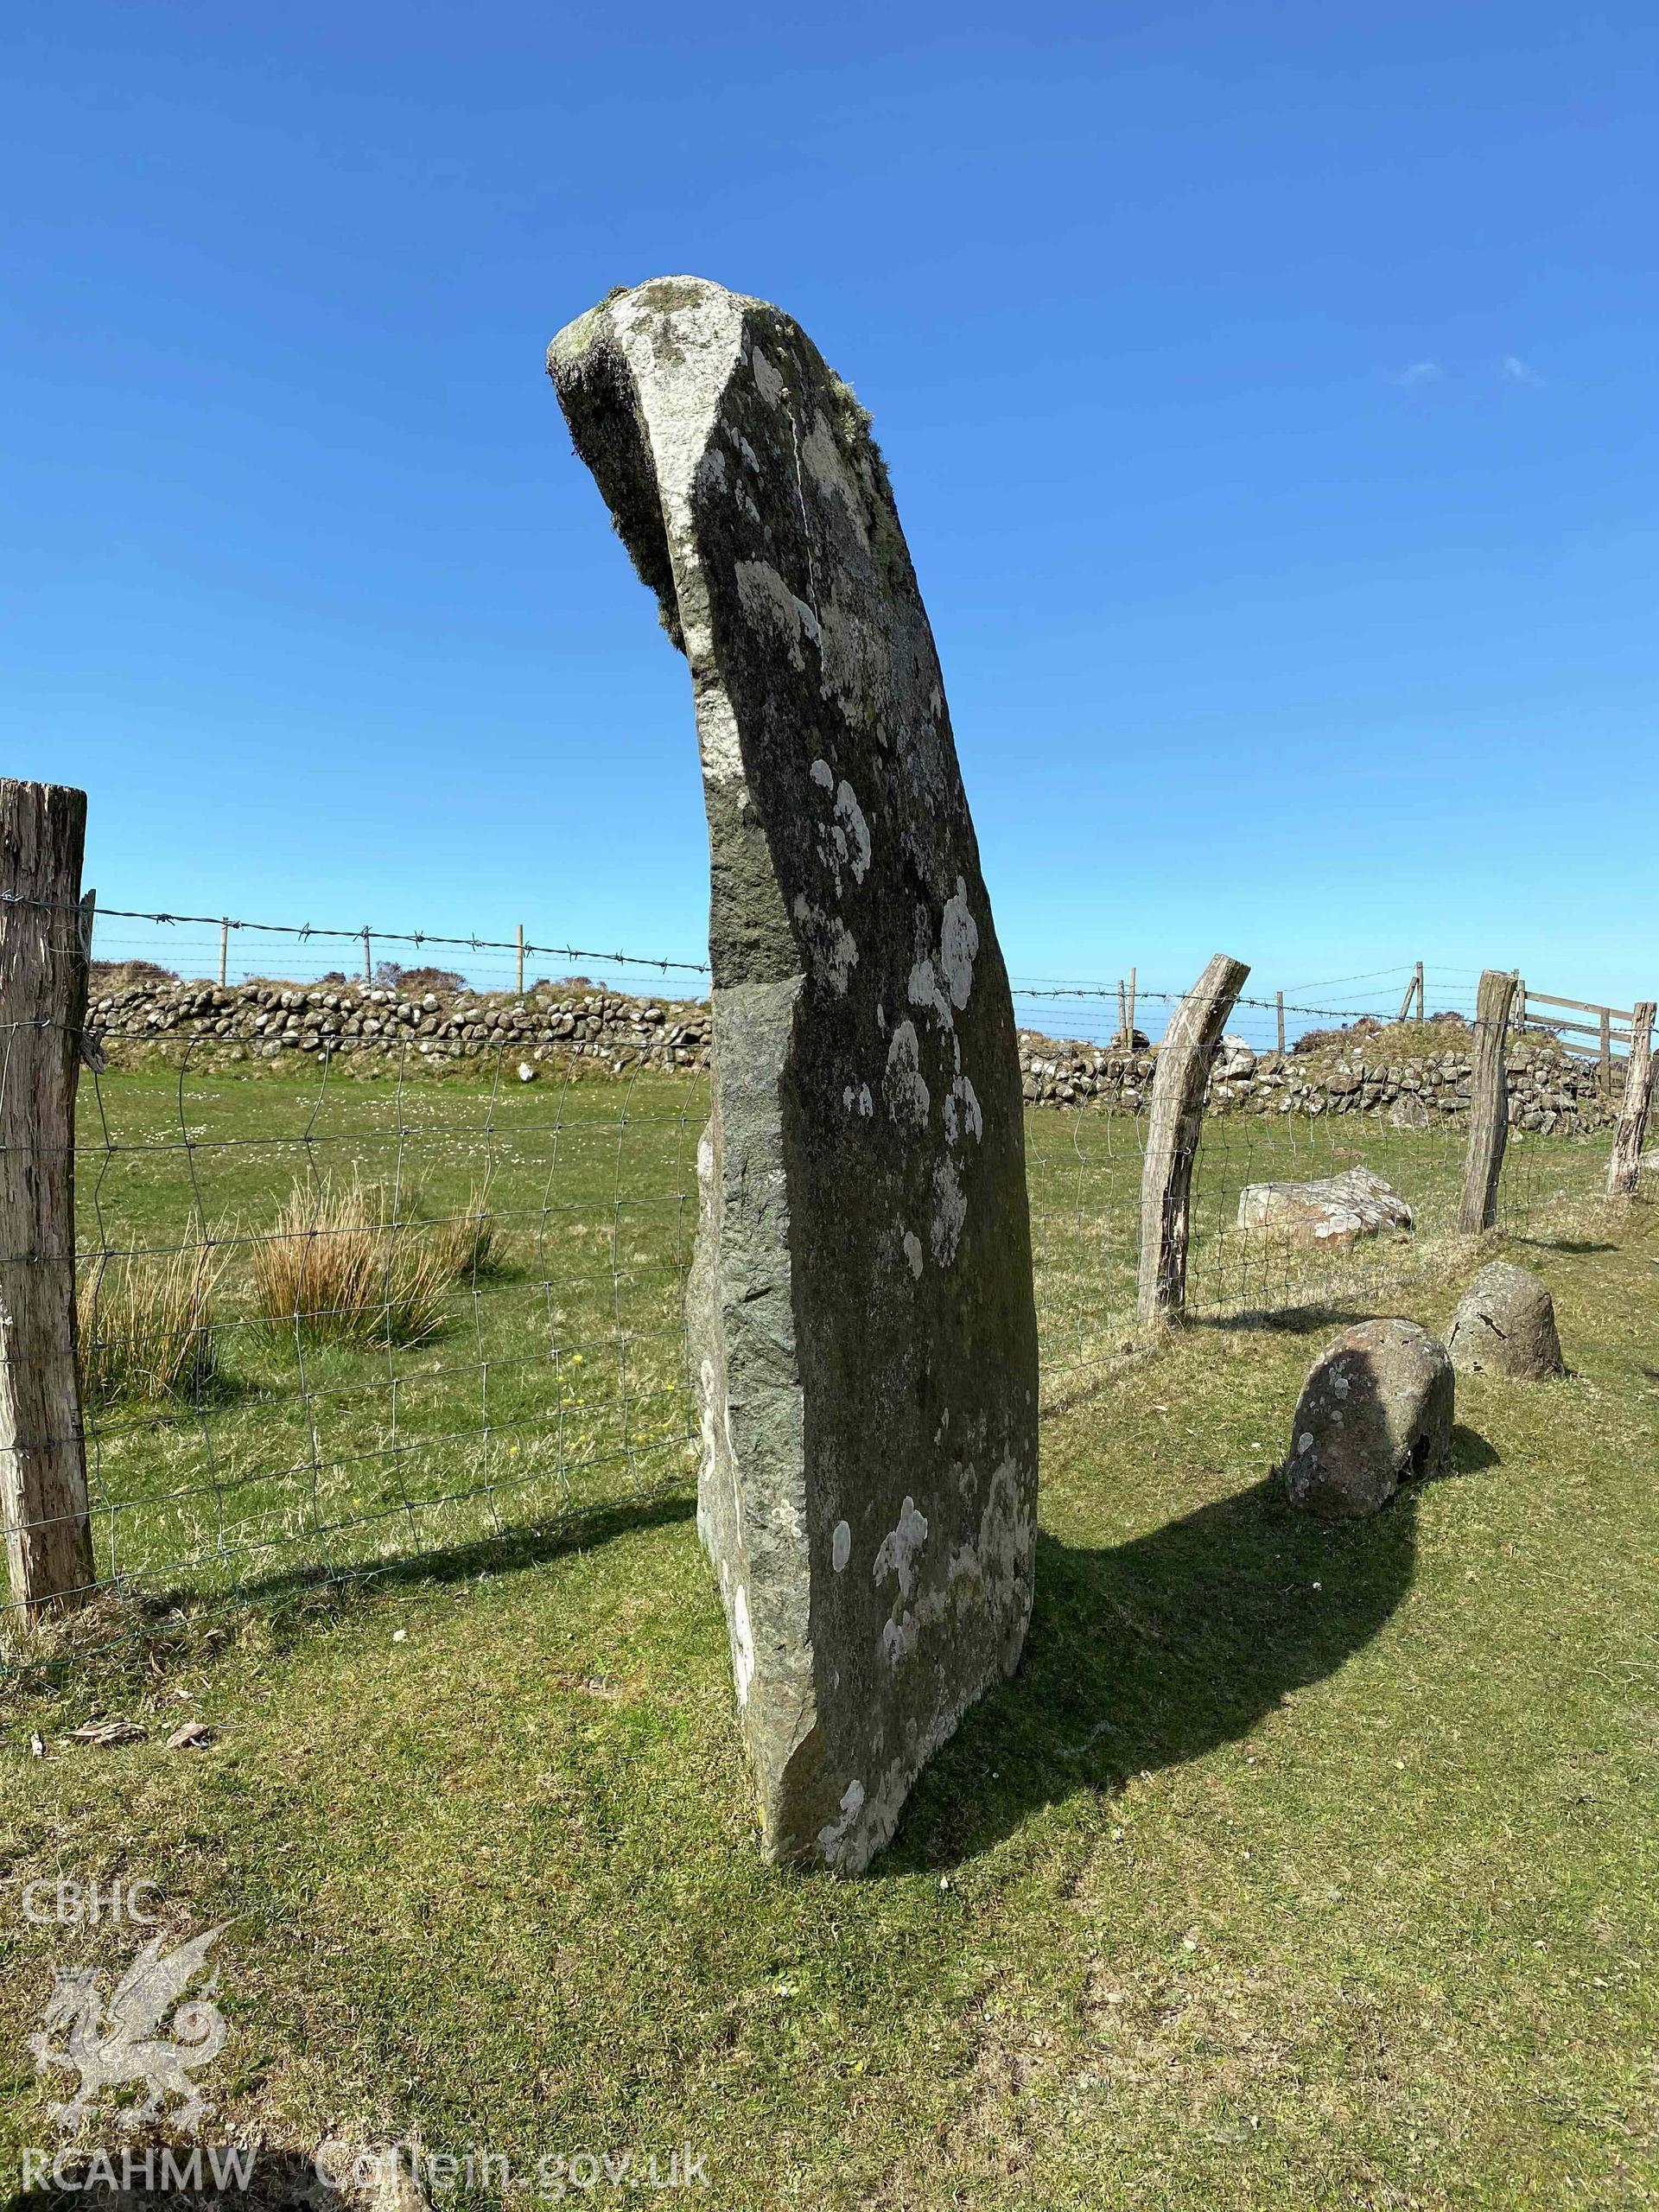 Digital photograph of Bedd Morris standing stone, produced by Paul Davis in 2020